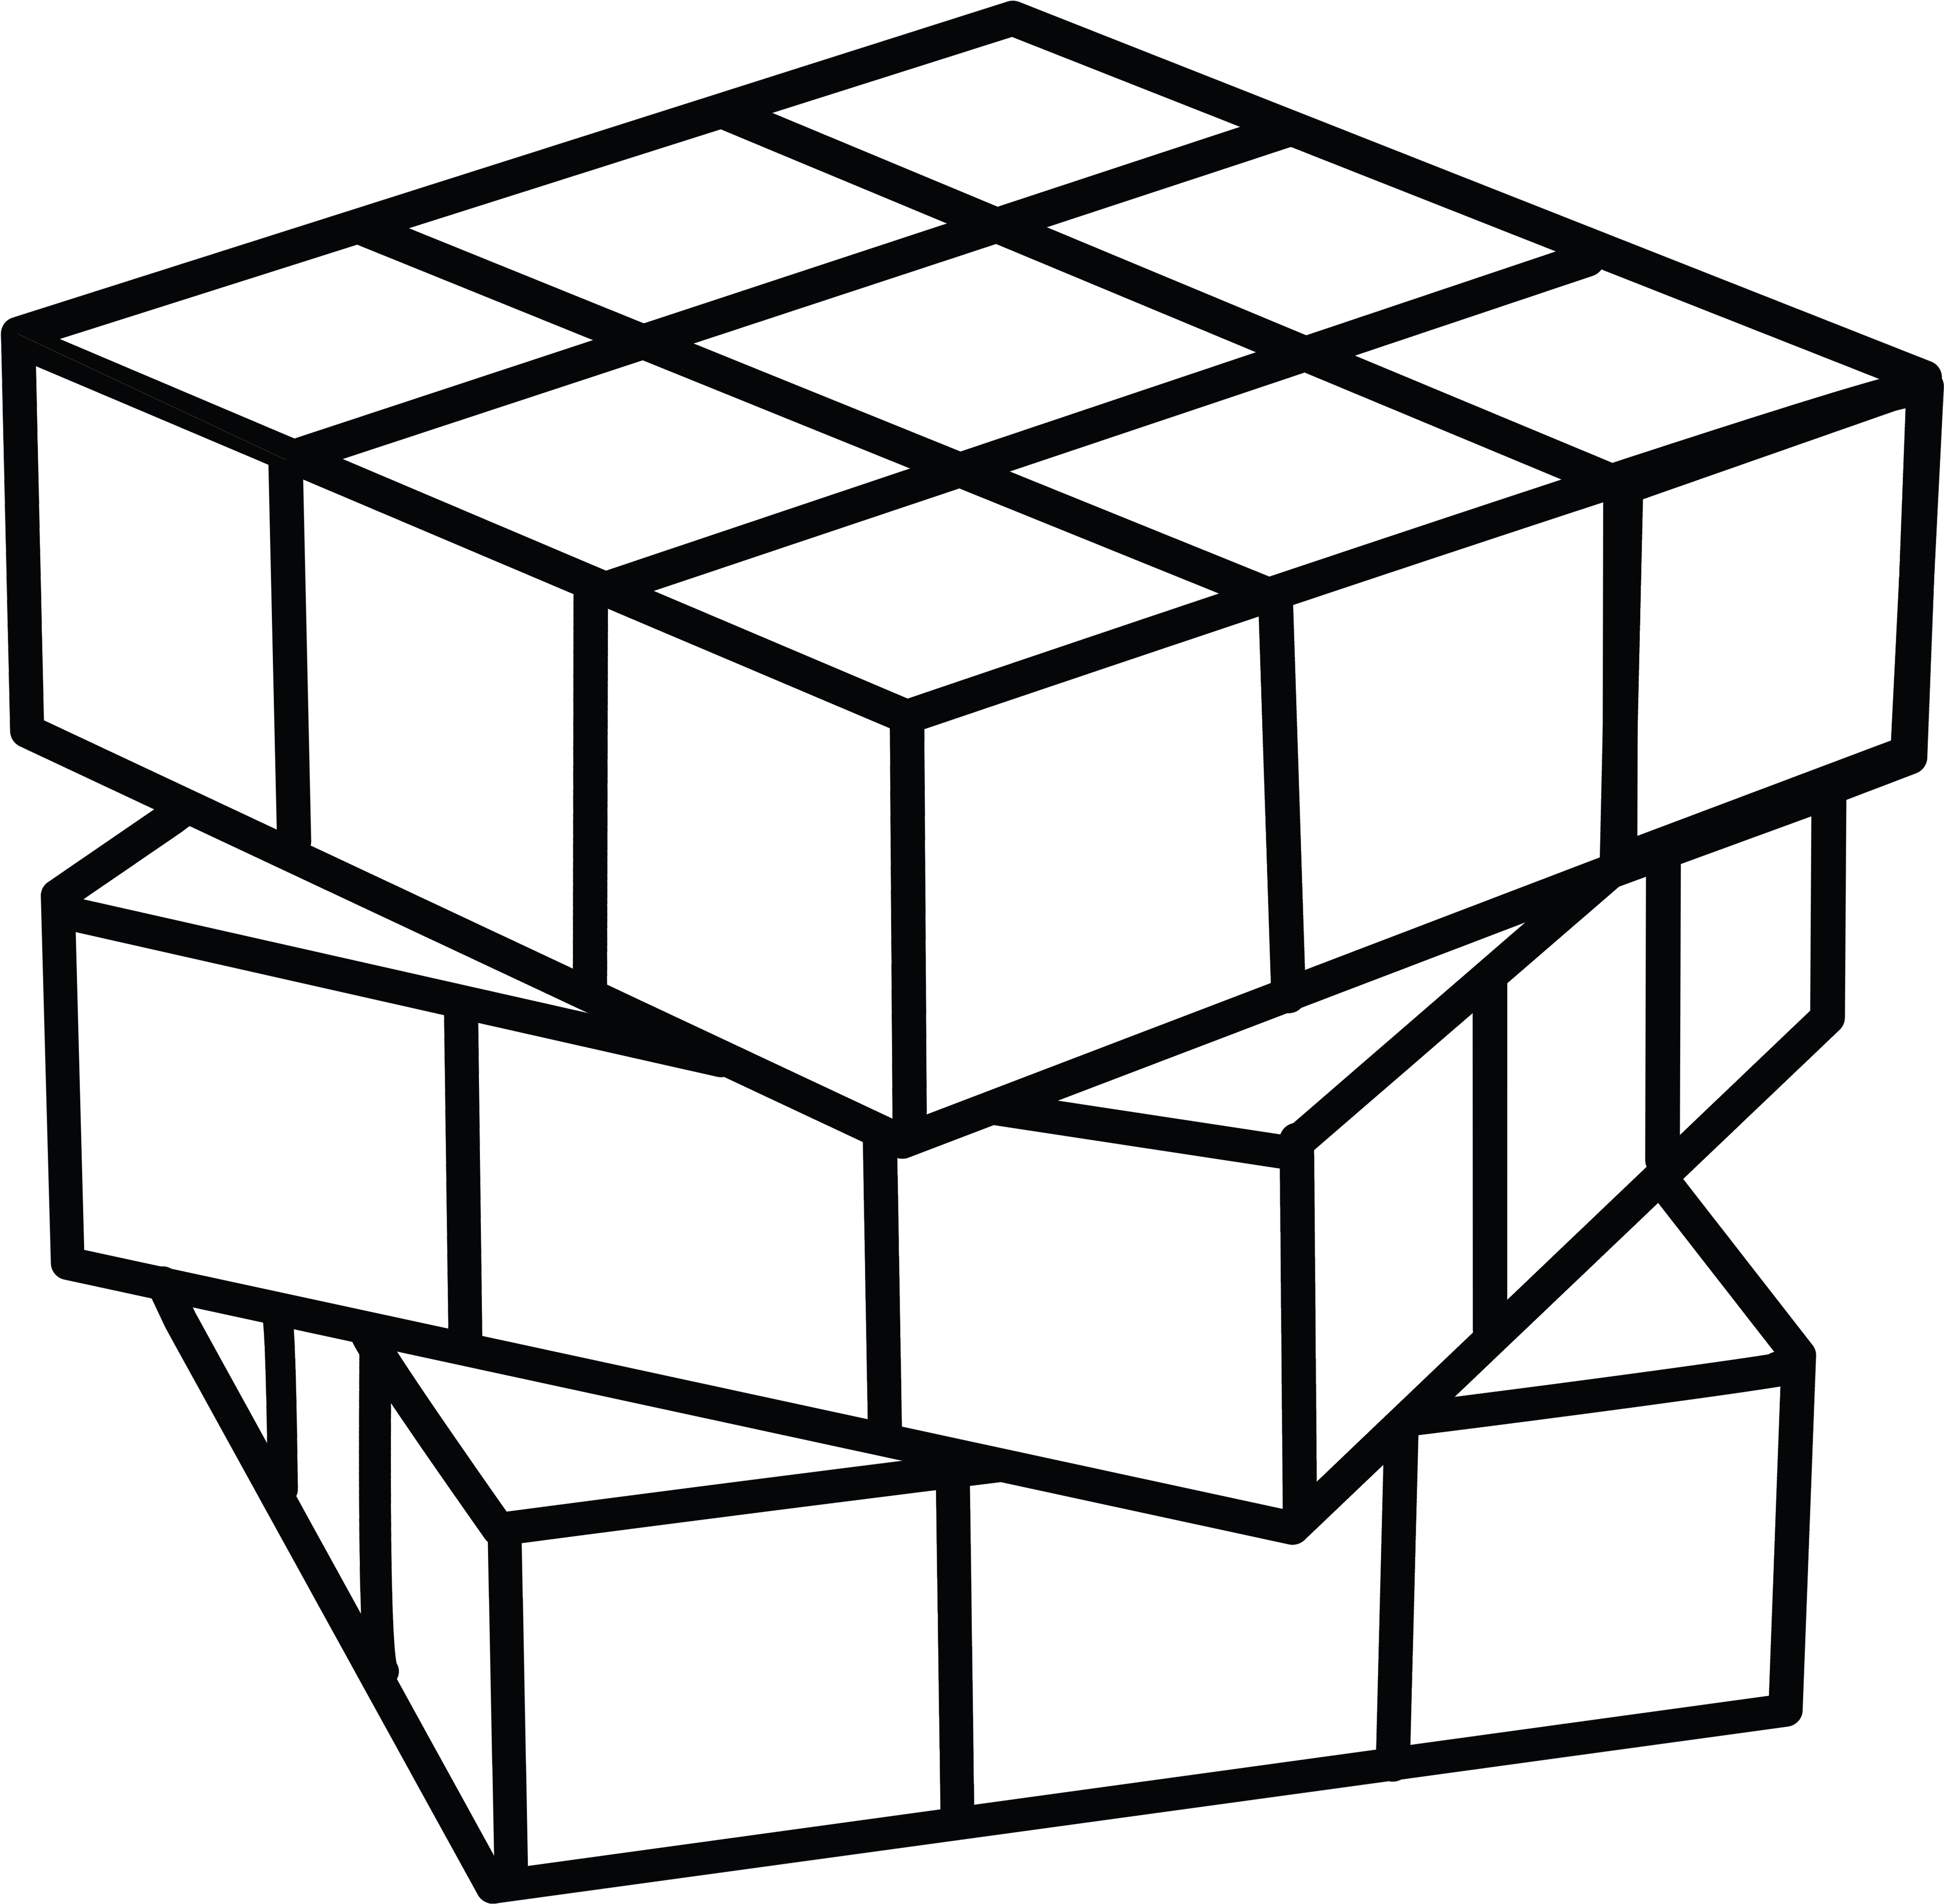 Rubiks Cube Coloring Pages - Best Coloring Pages For Kids